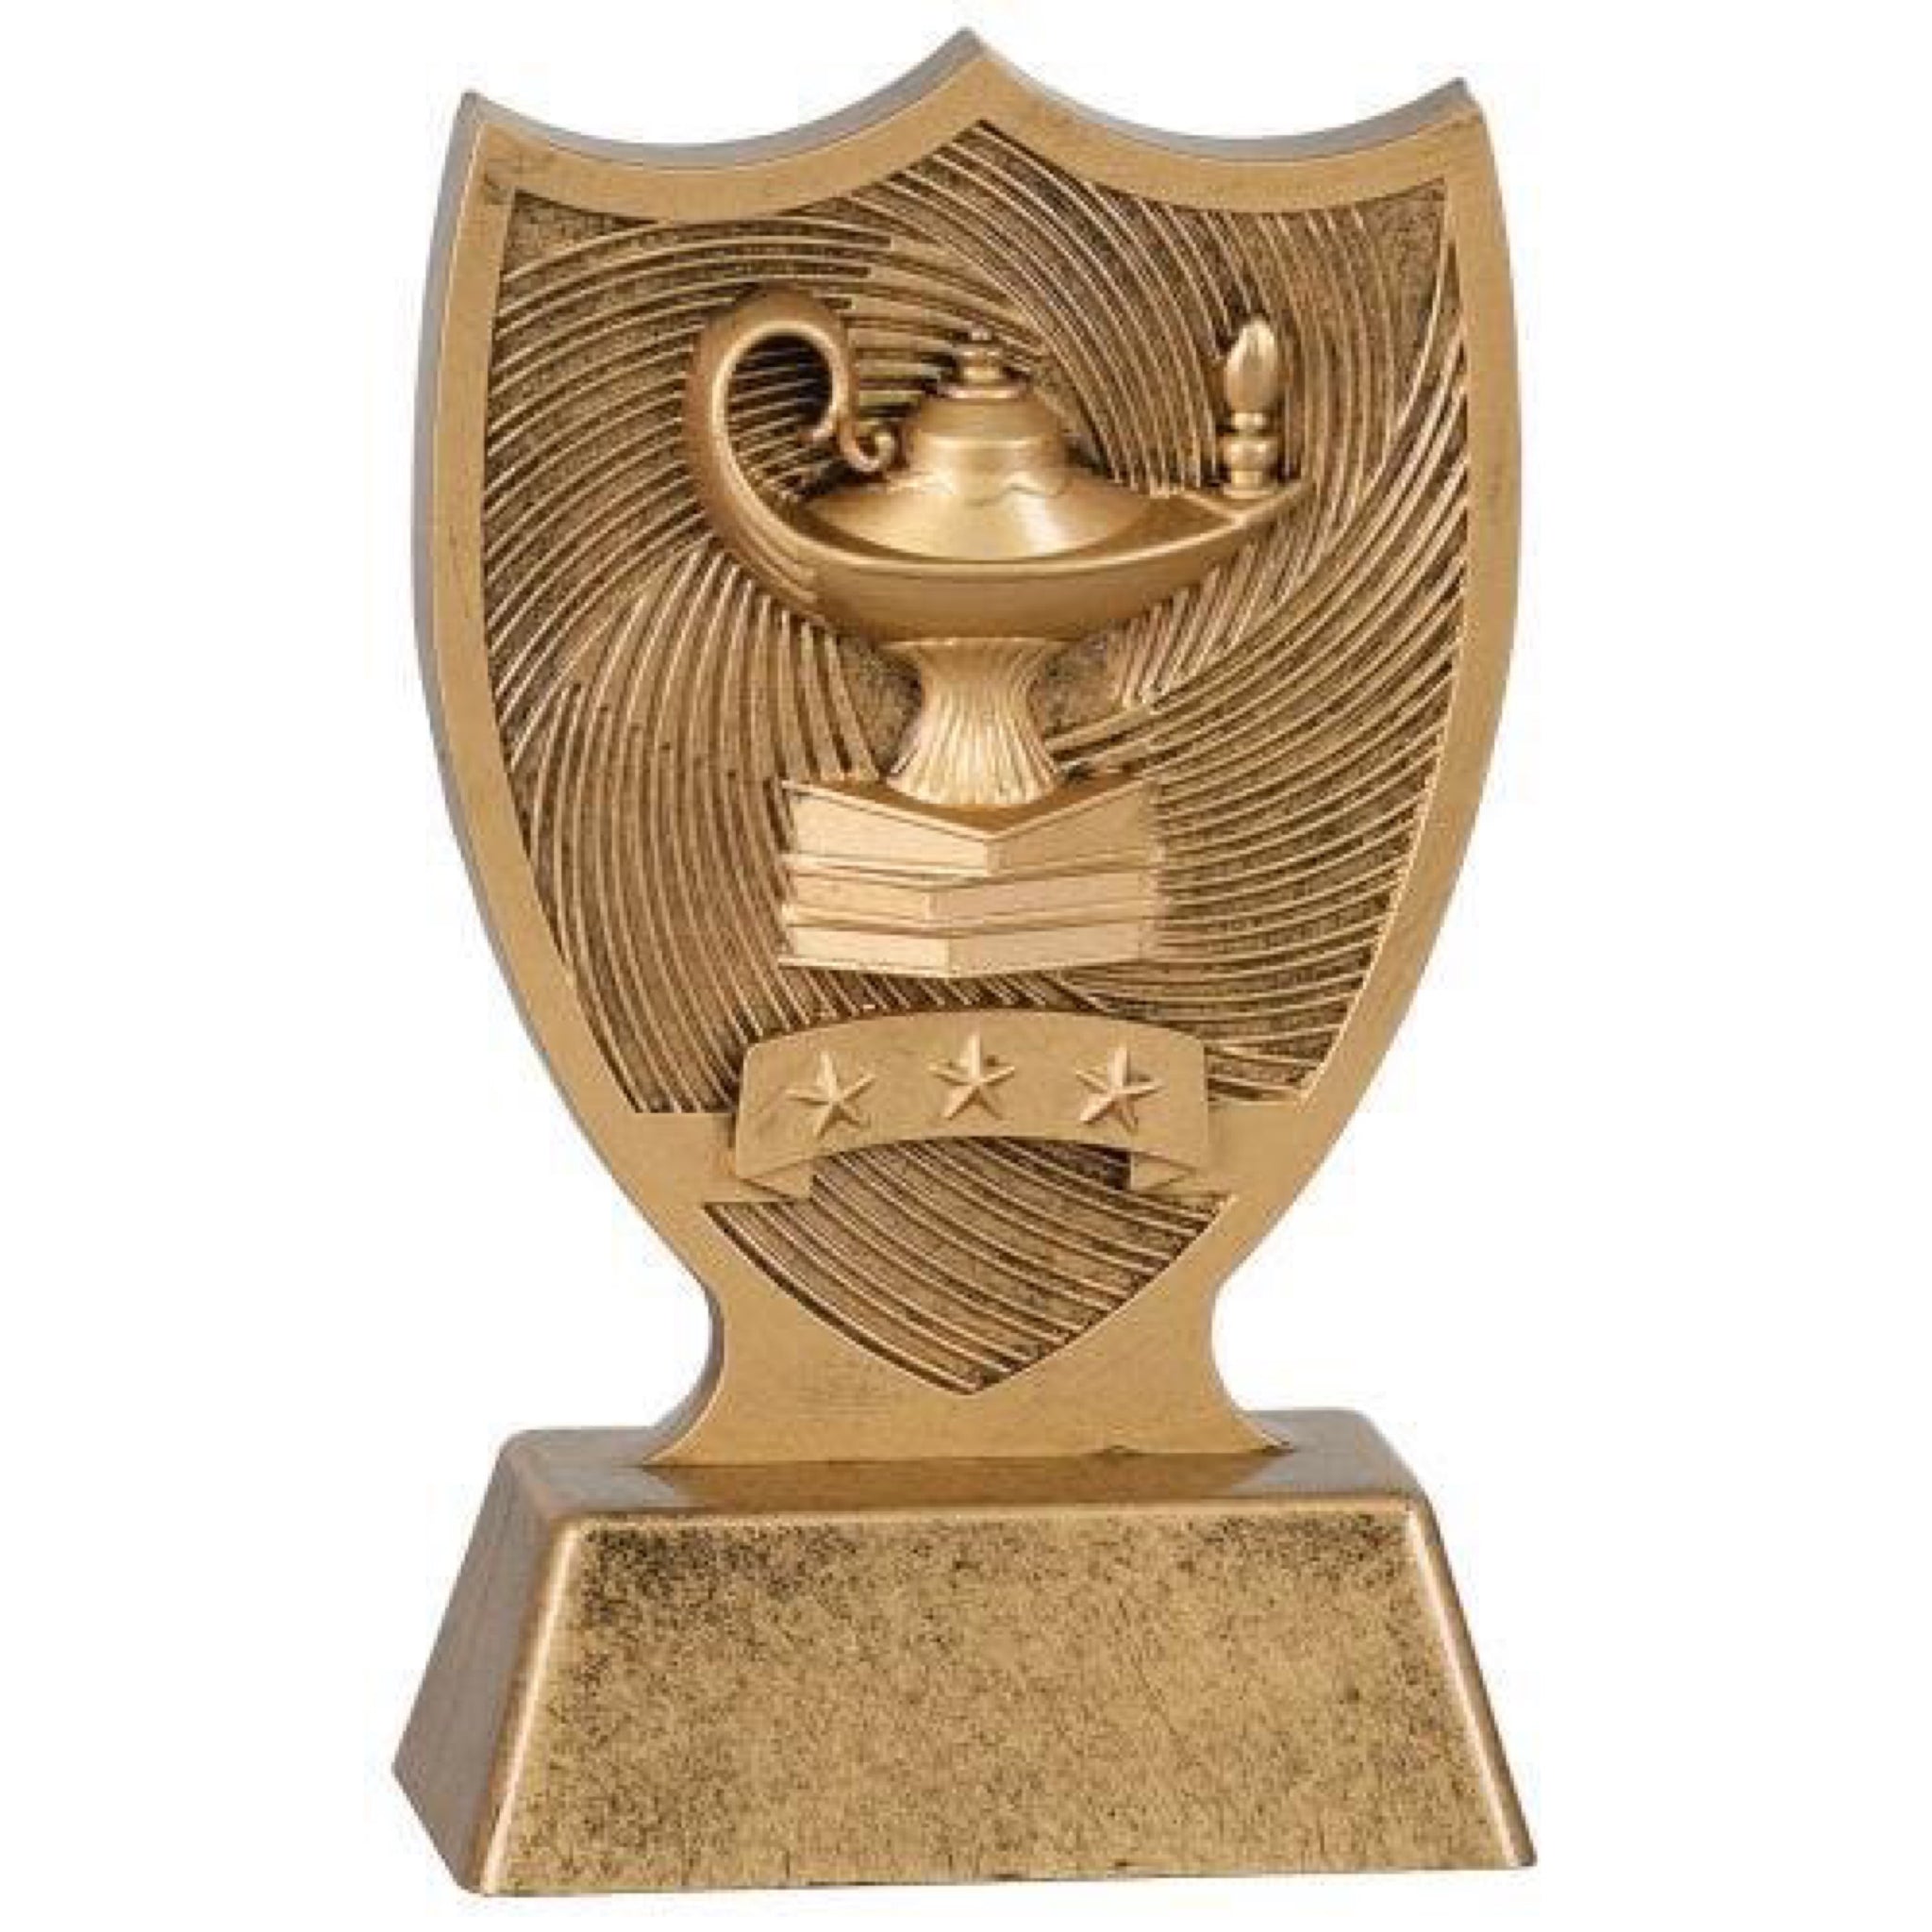 Gold academic trophy featuring a lamp of knowledge sitting on top of a stack of books inside a shield shaped design.